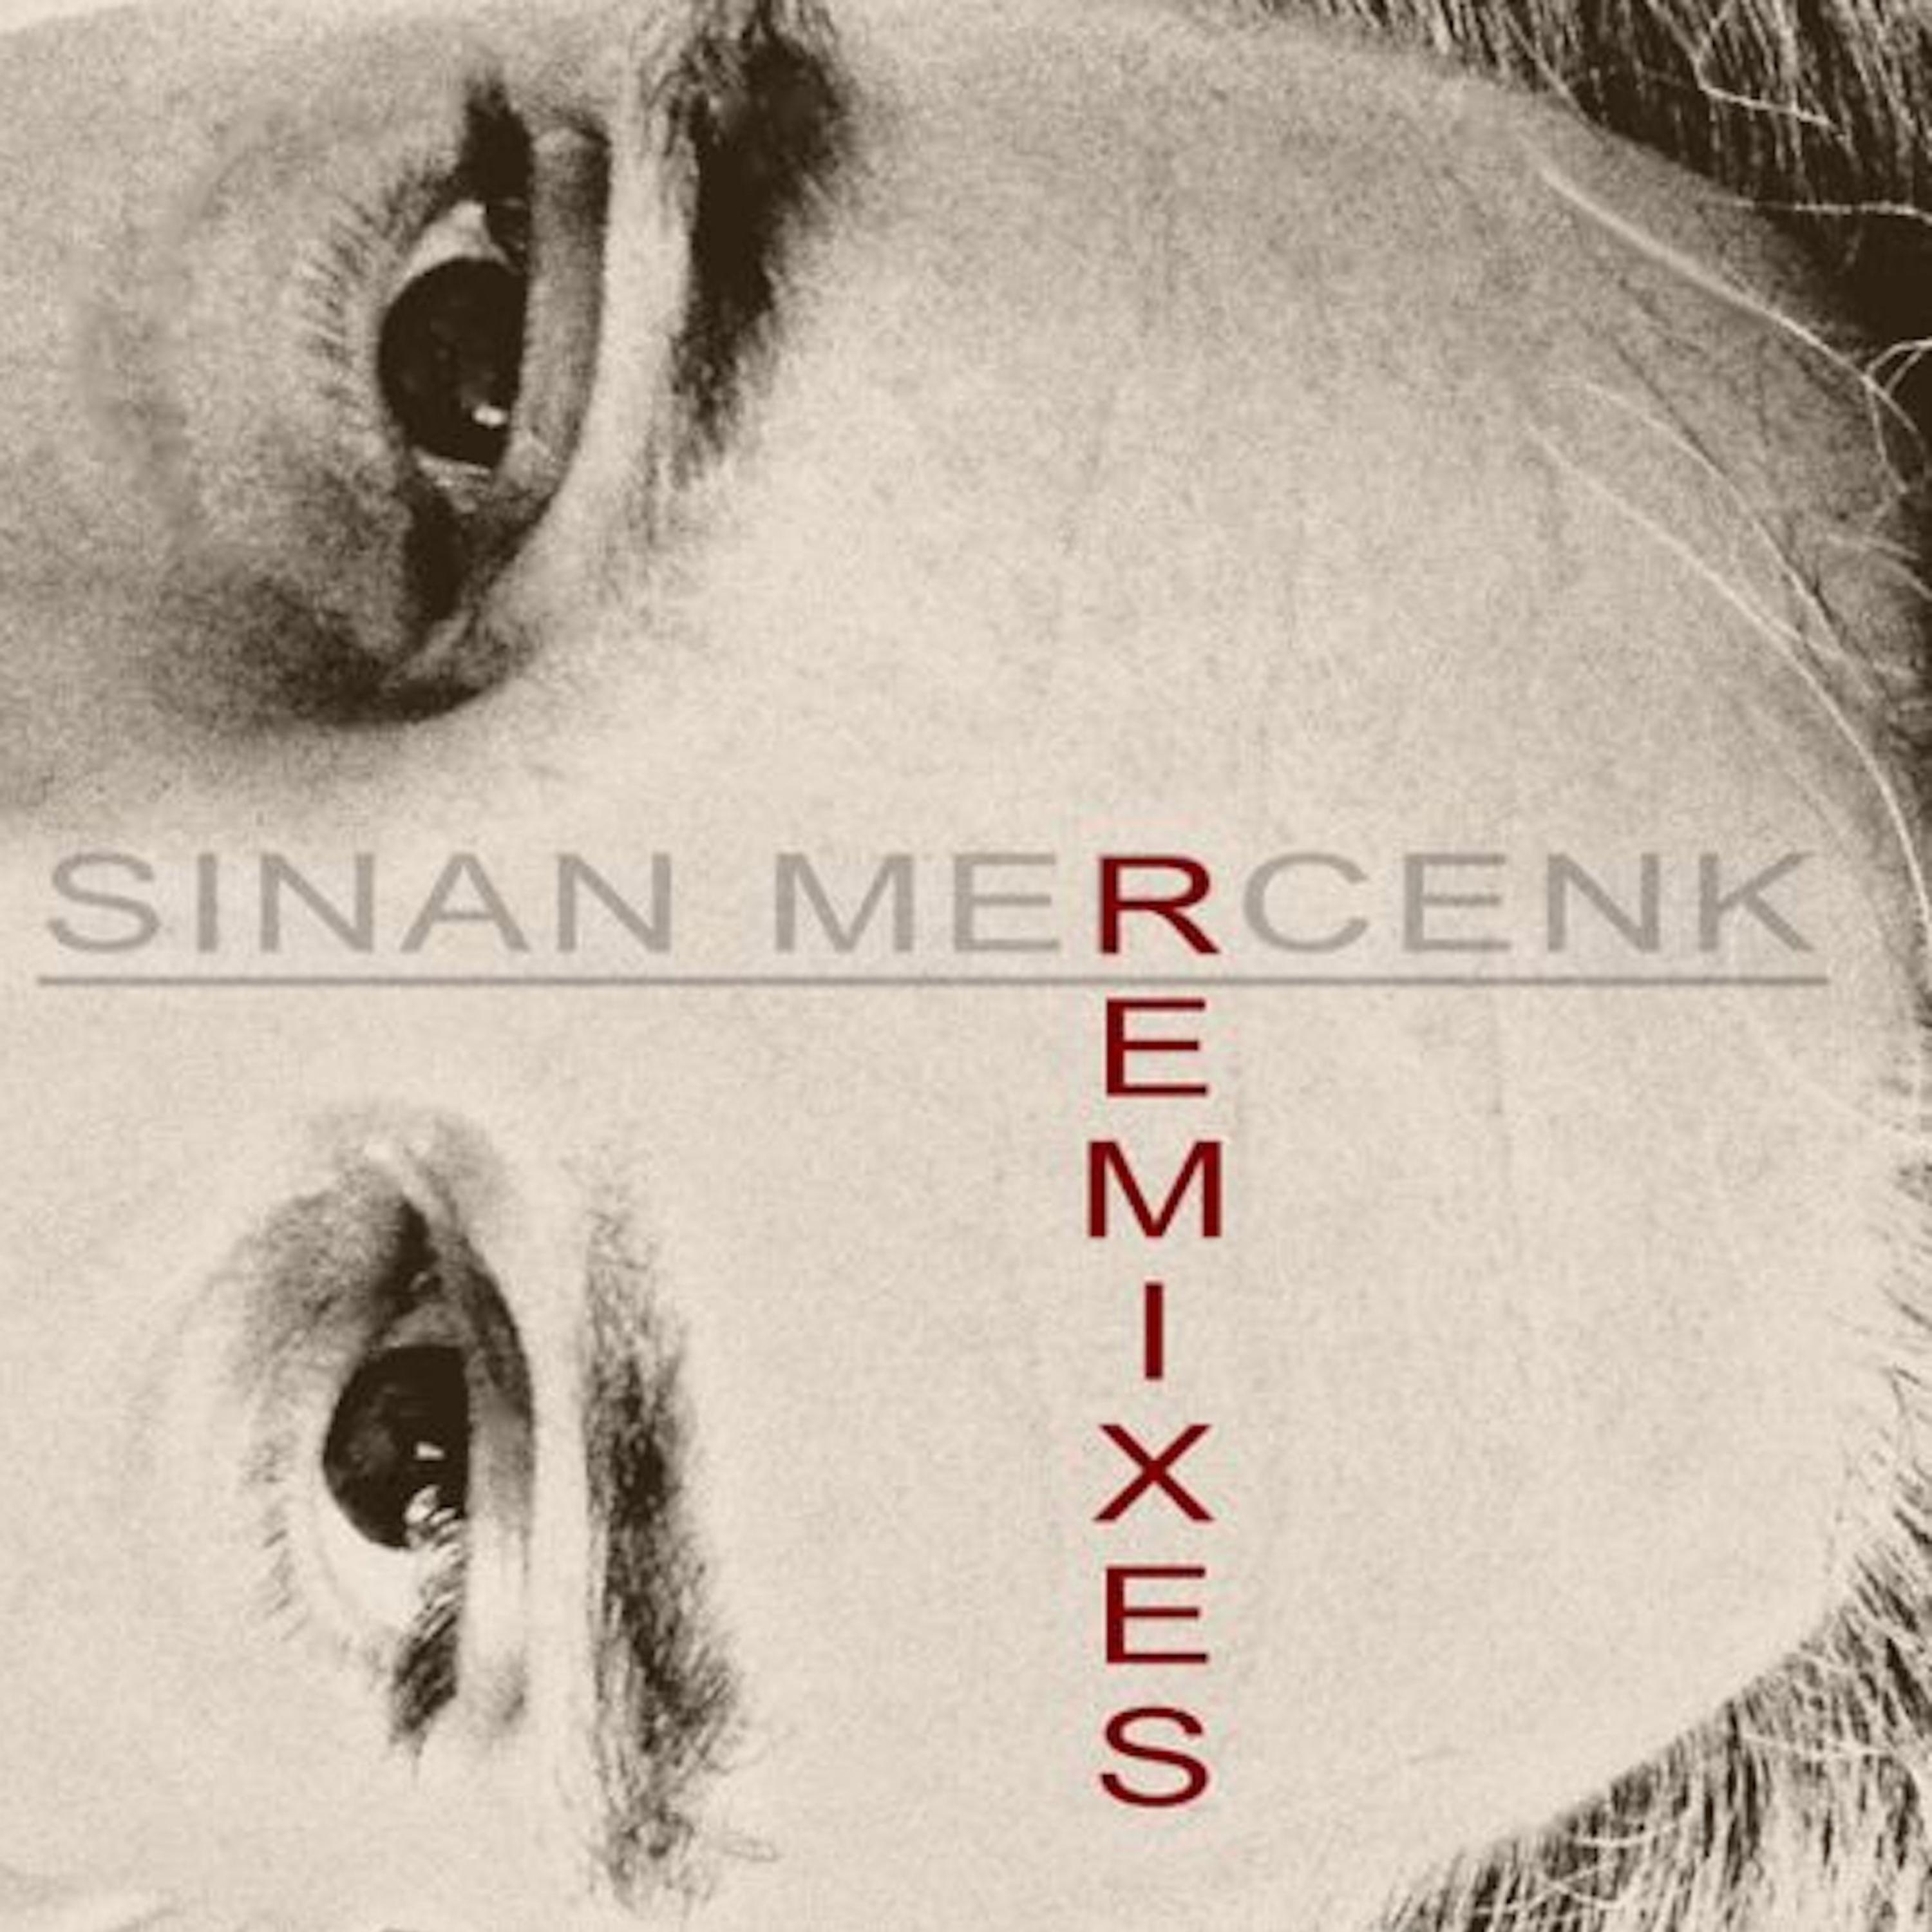 Otherwise (Sinan Mercenk's Lounge Couture Mix)